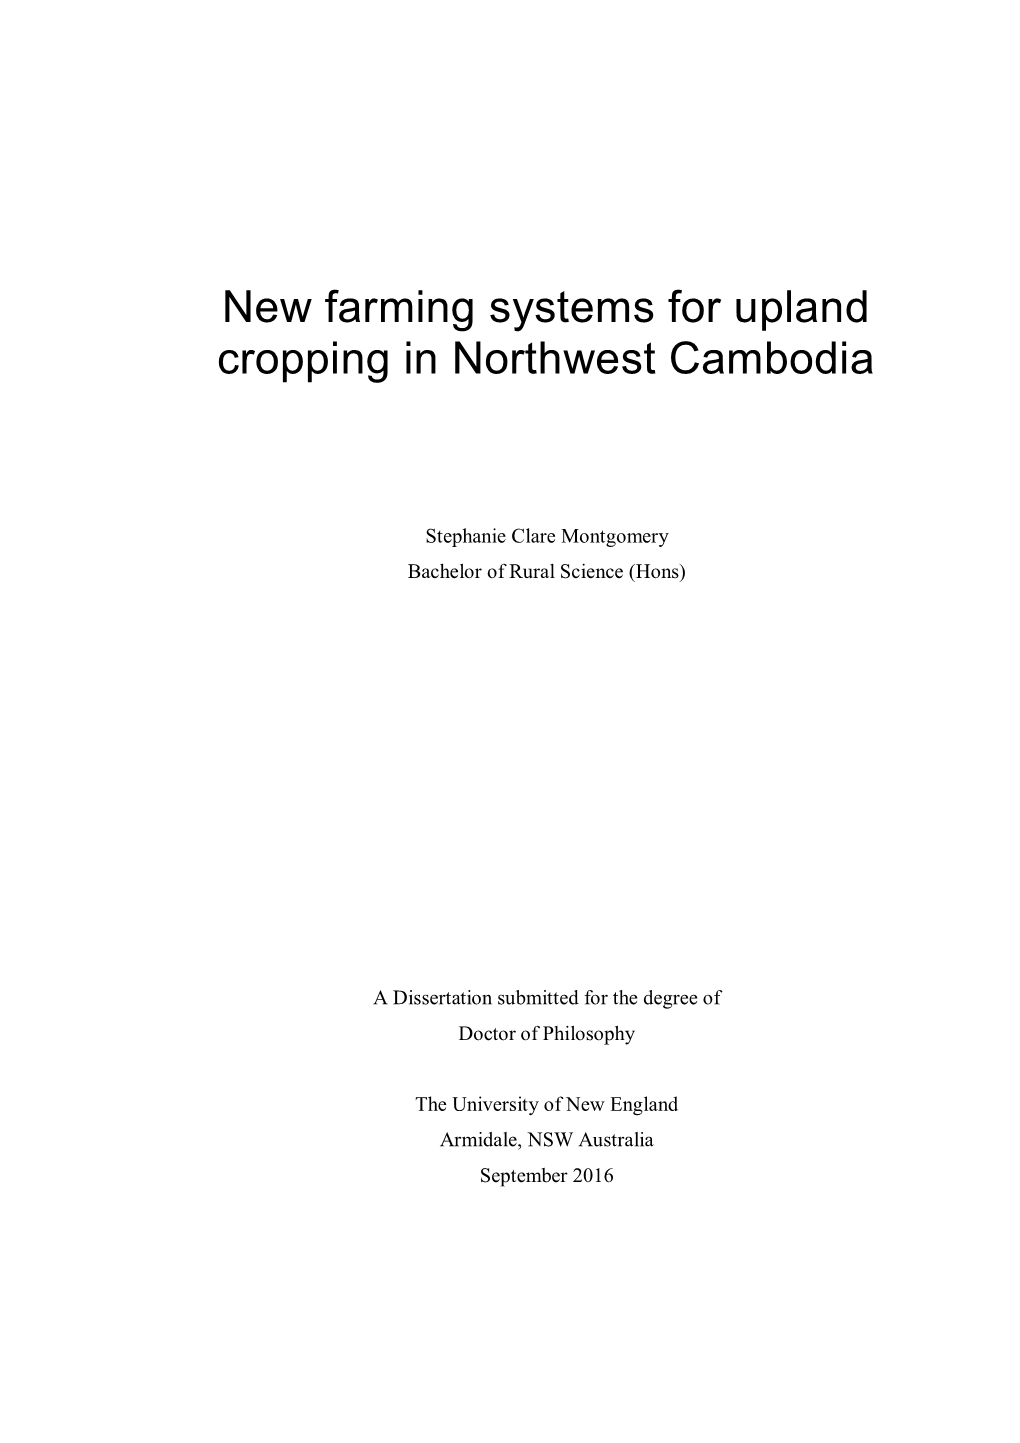 New Farming Systems for Upland Cropping in Northwest Cambodia